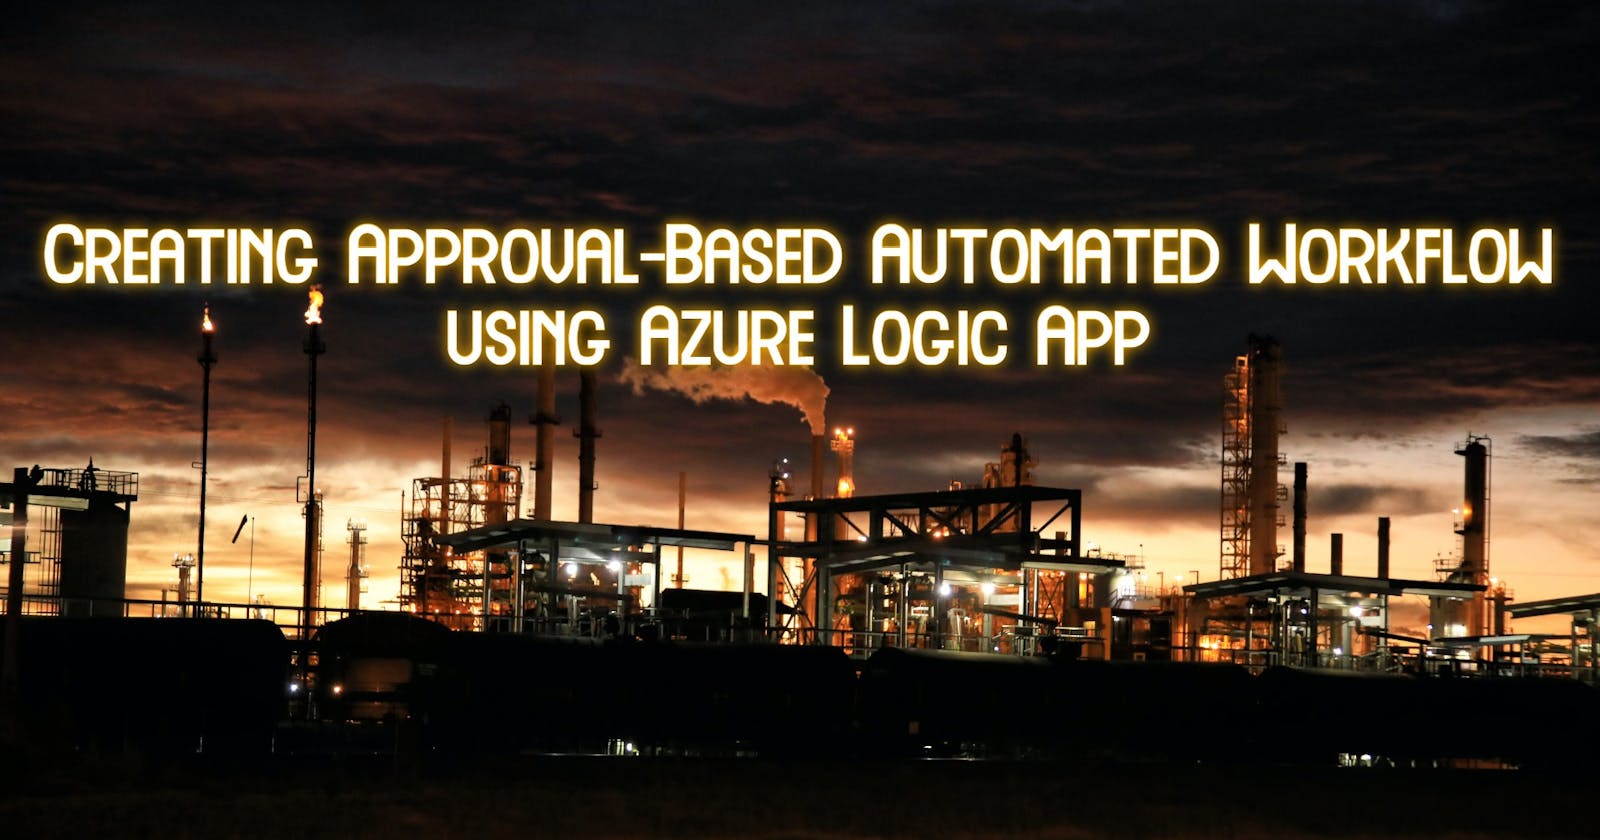 Creating Approval-Based Automated Workflow using Azure Logic App